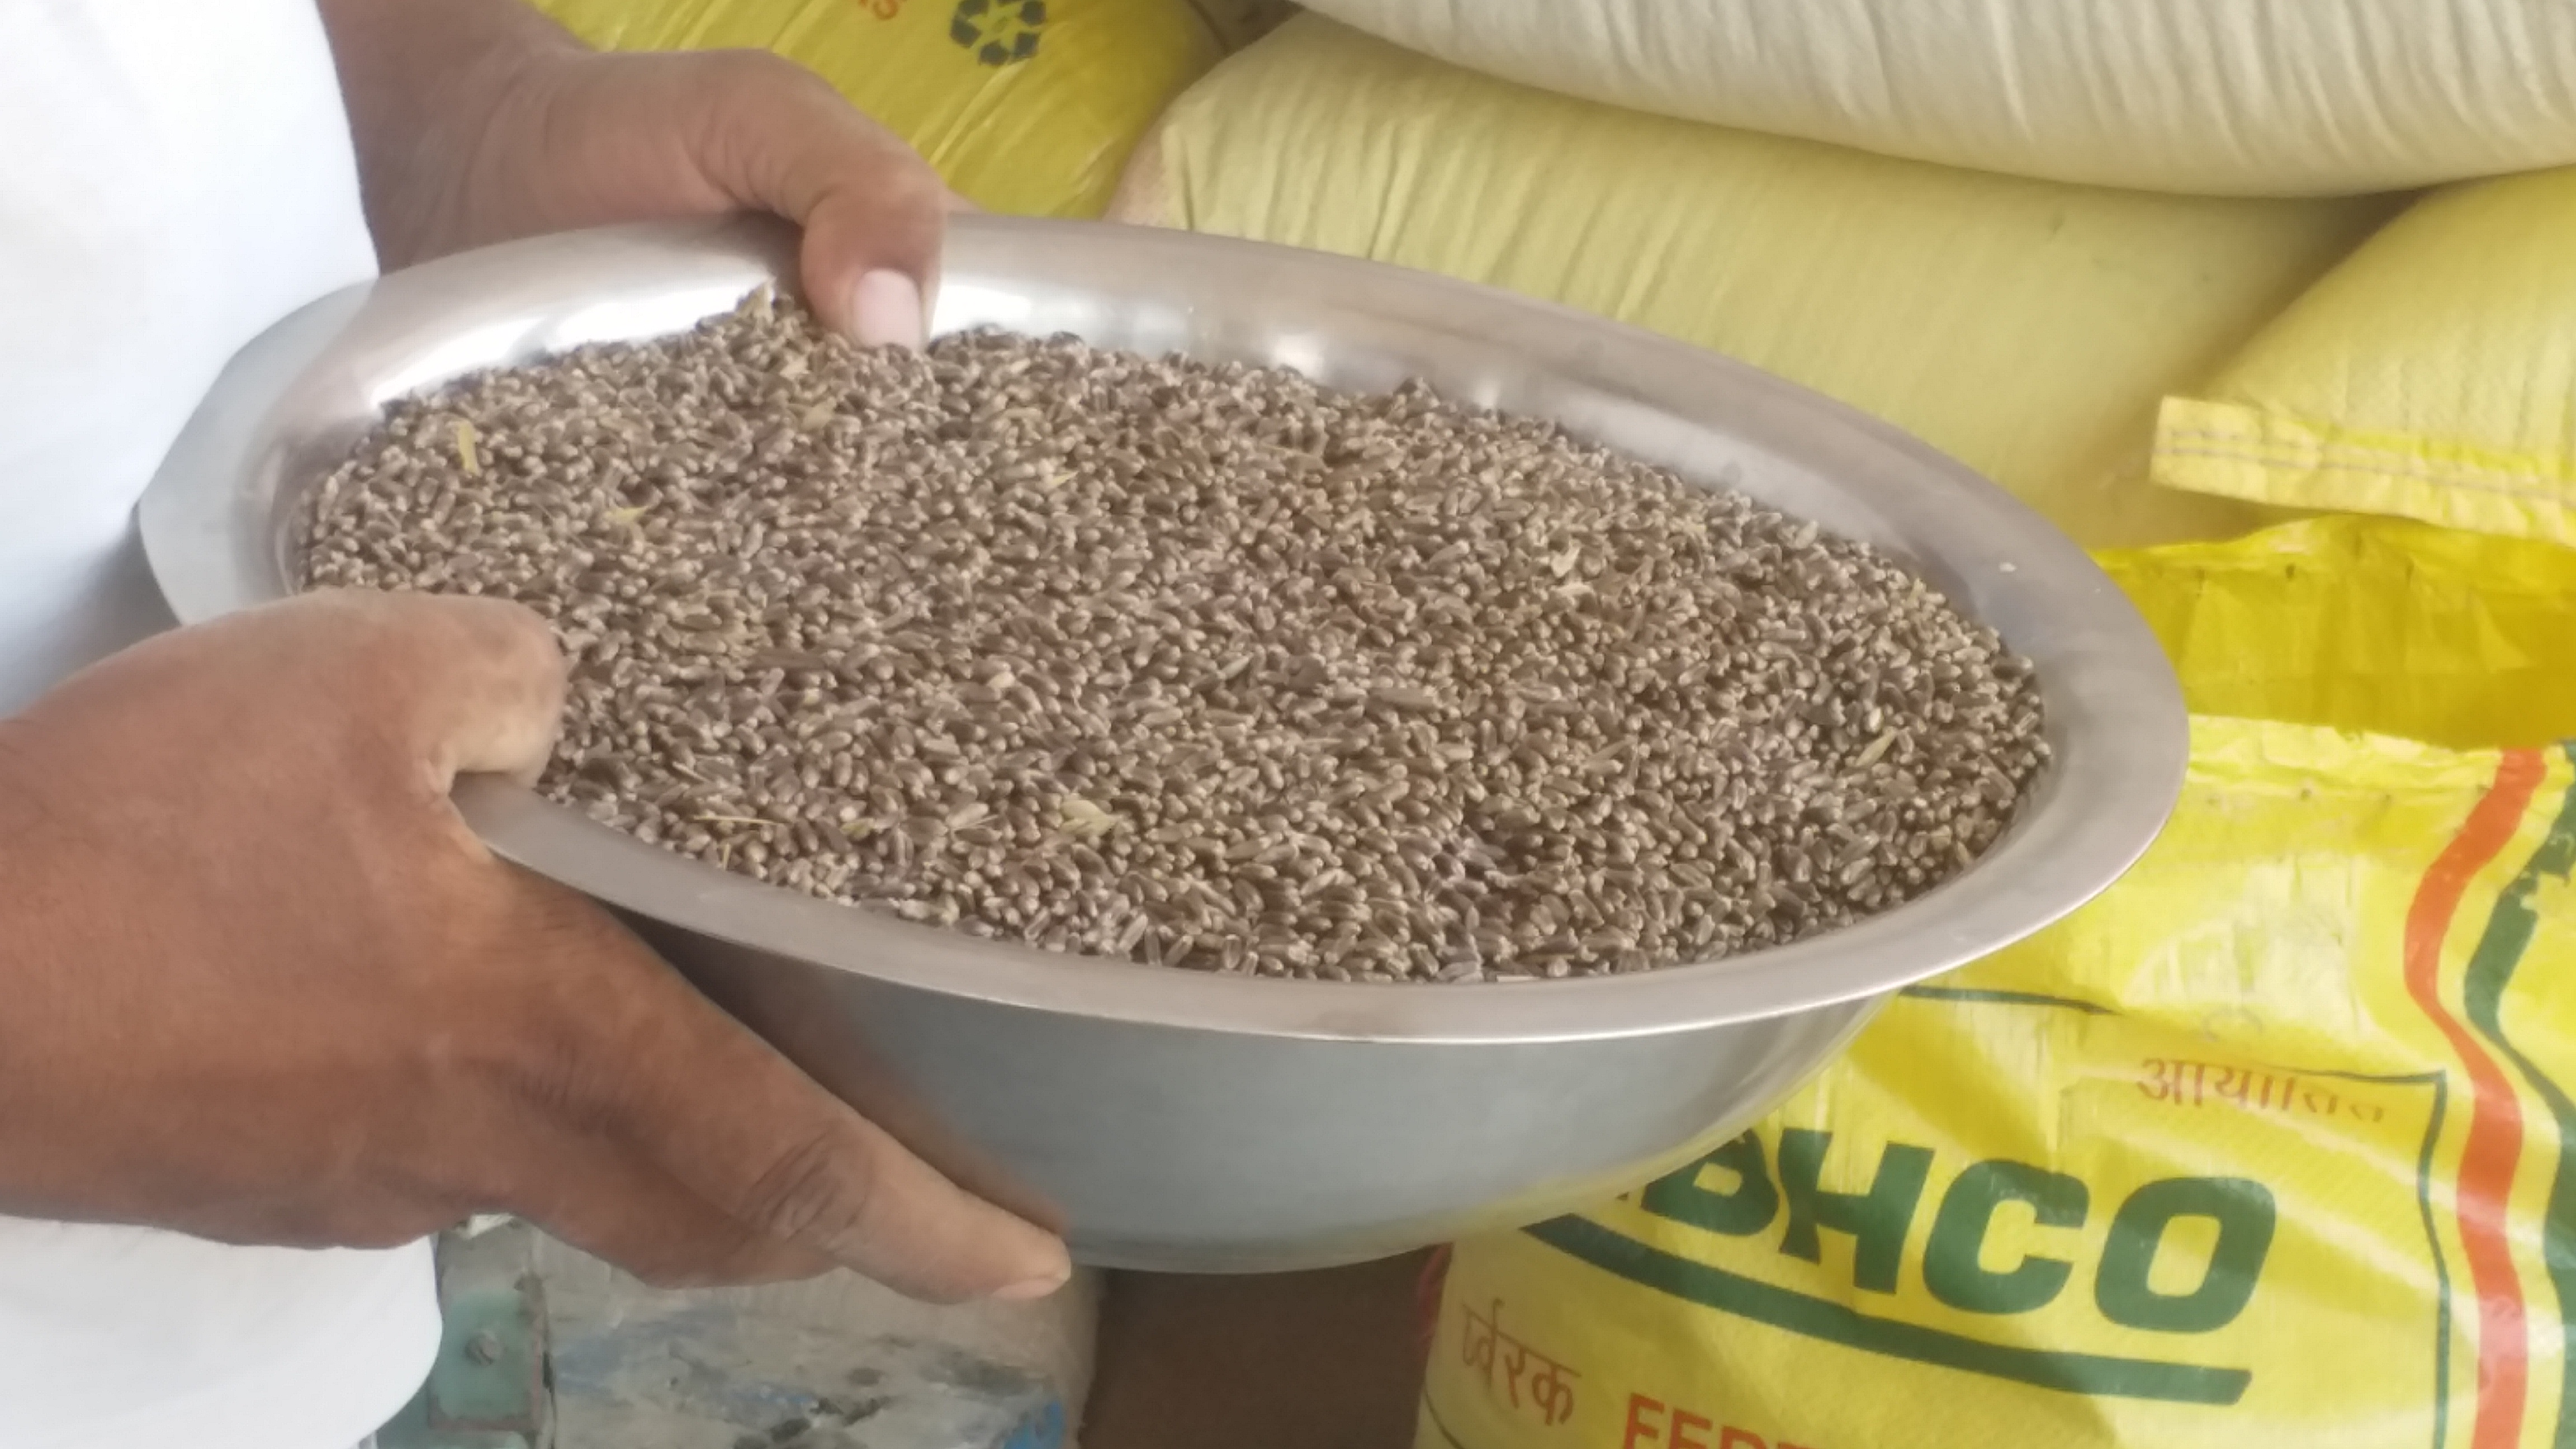 Farmer planted black colored wheat, tell many benefits